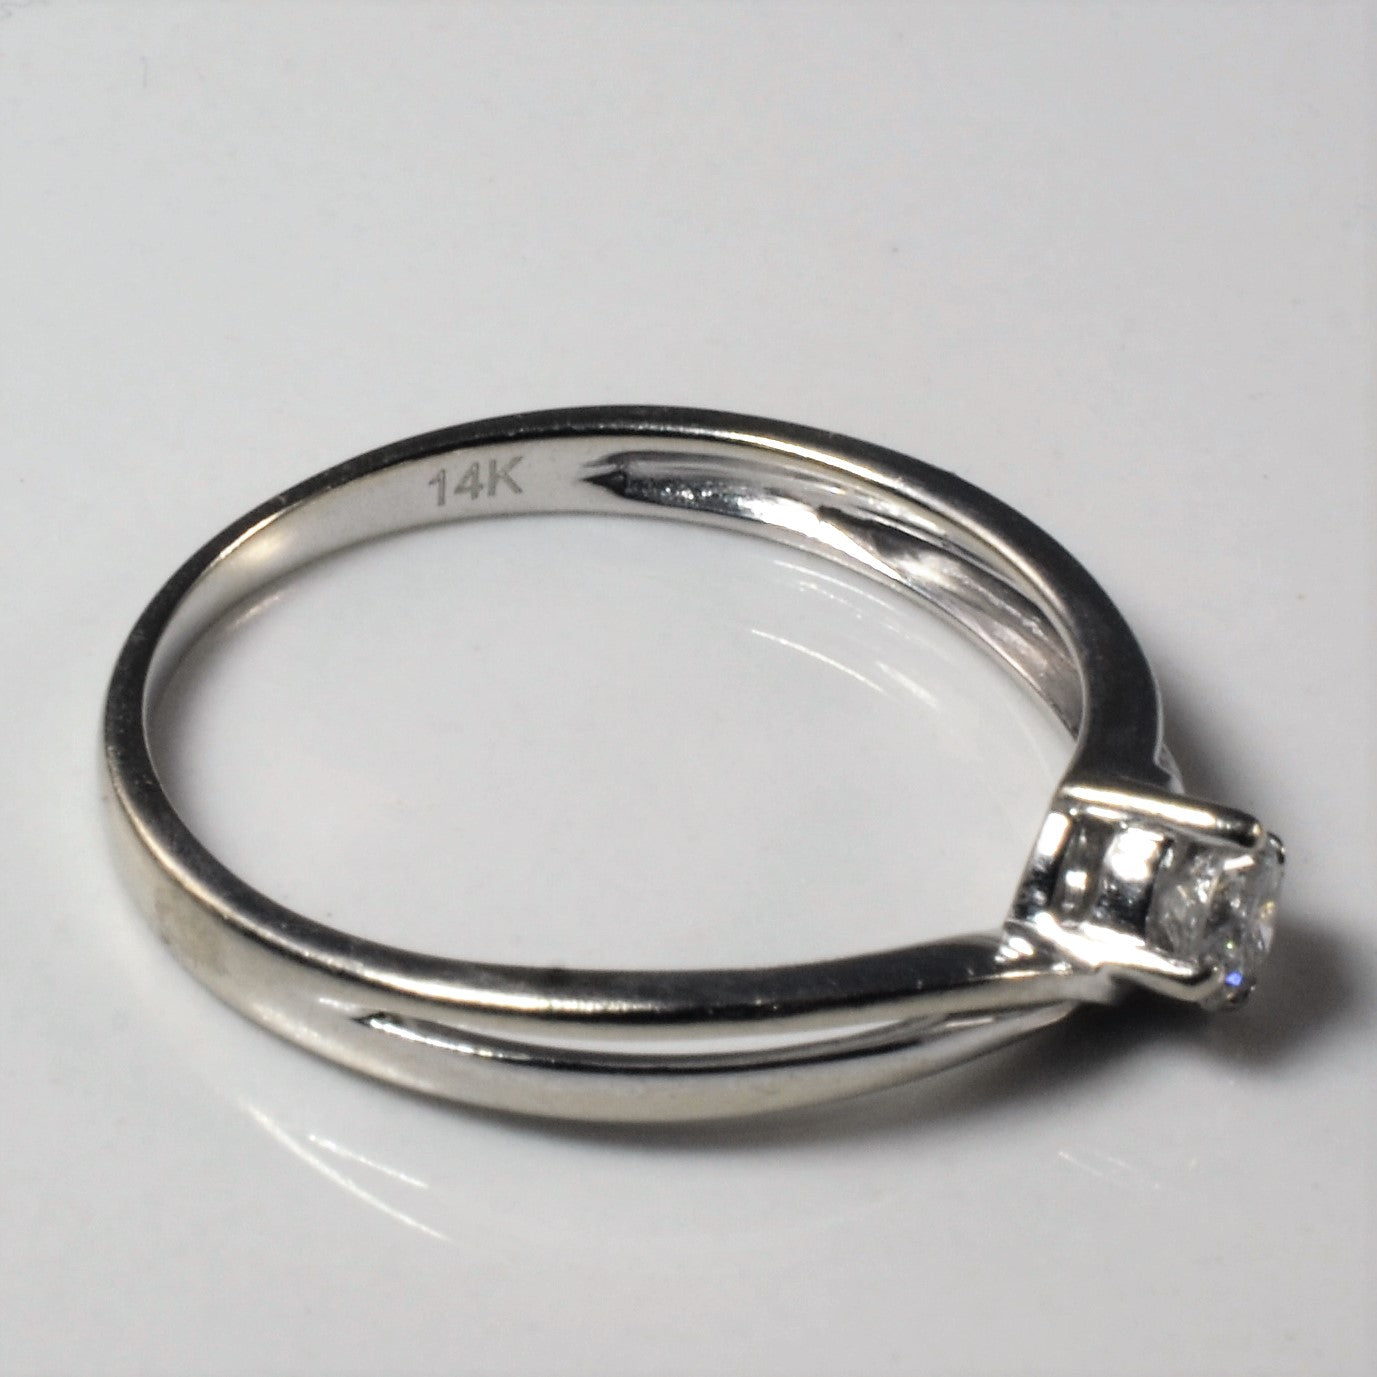 Bypass Solitaire Diamond Ring | 0.15ct | SZ 6.75 |